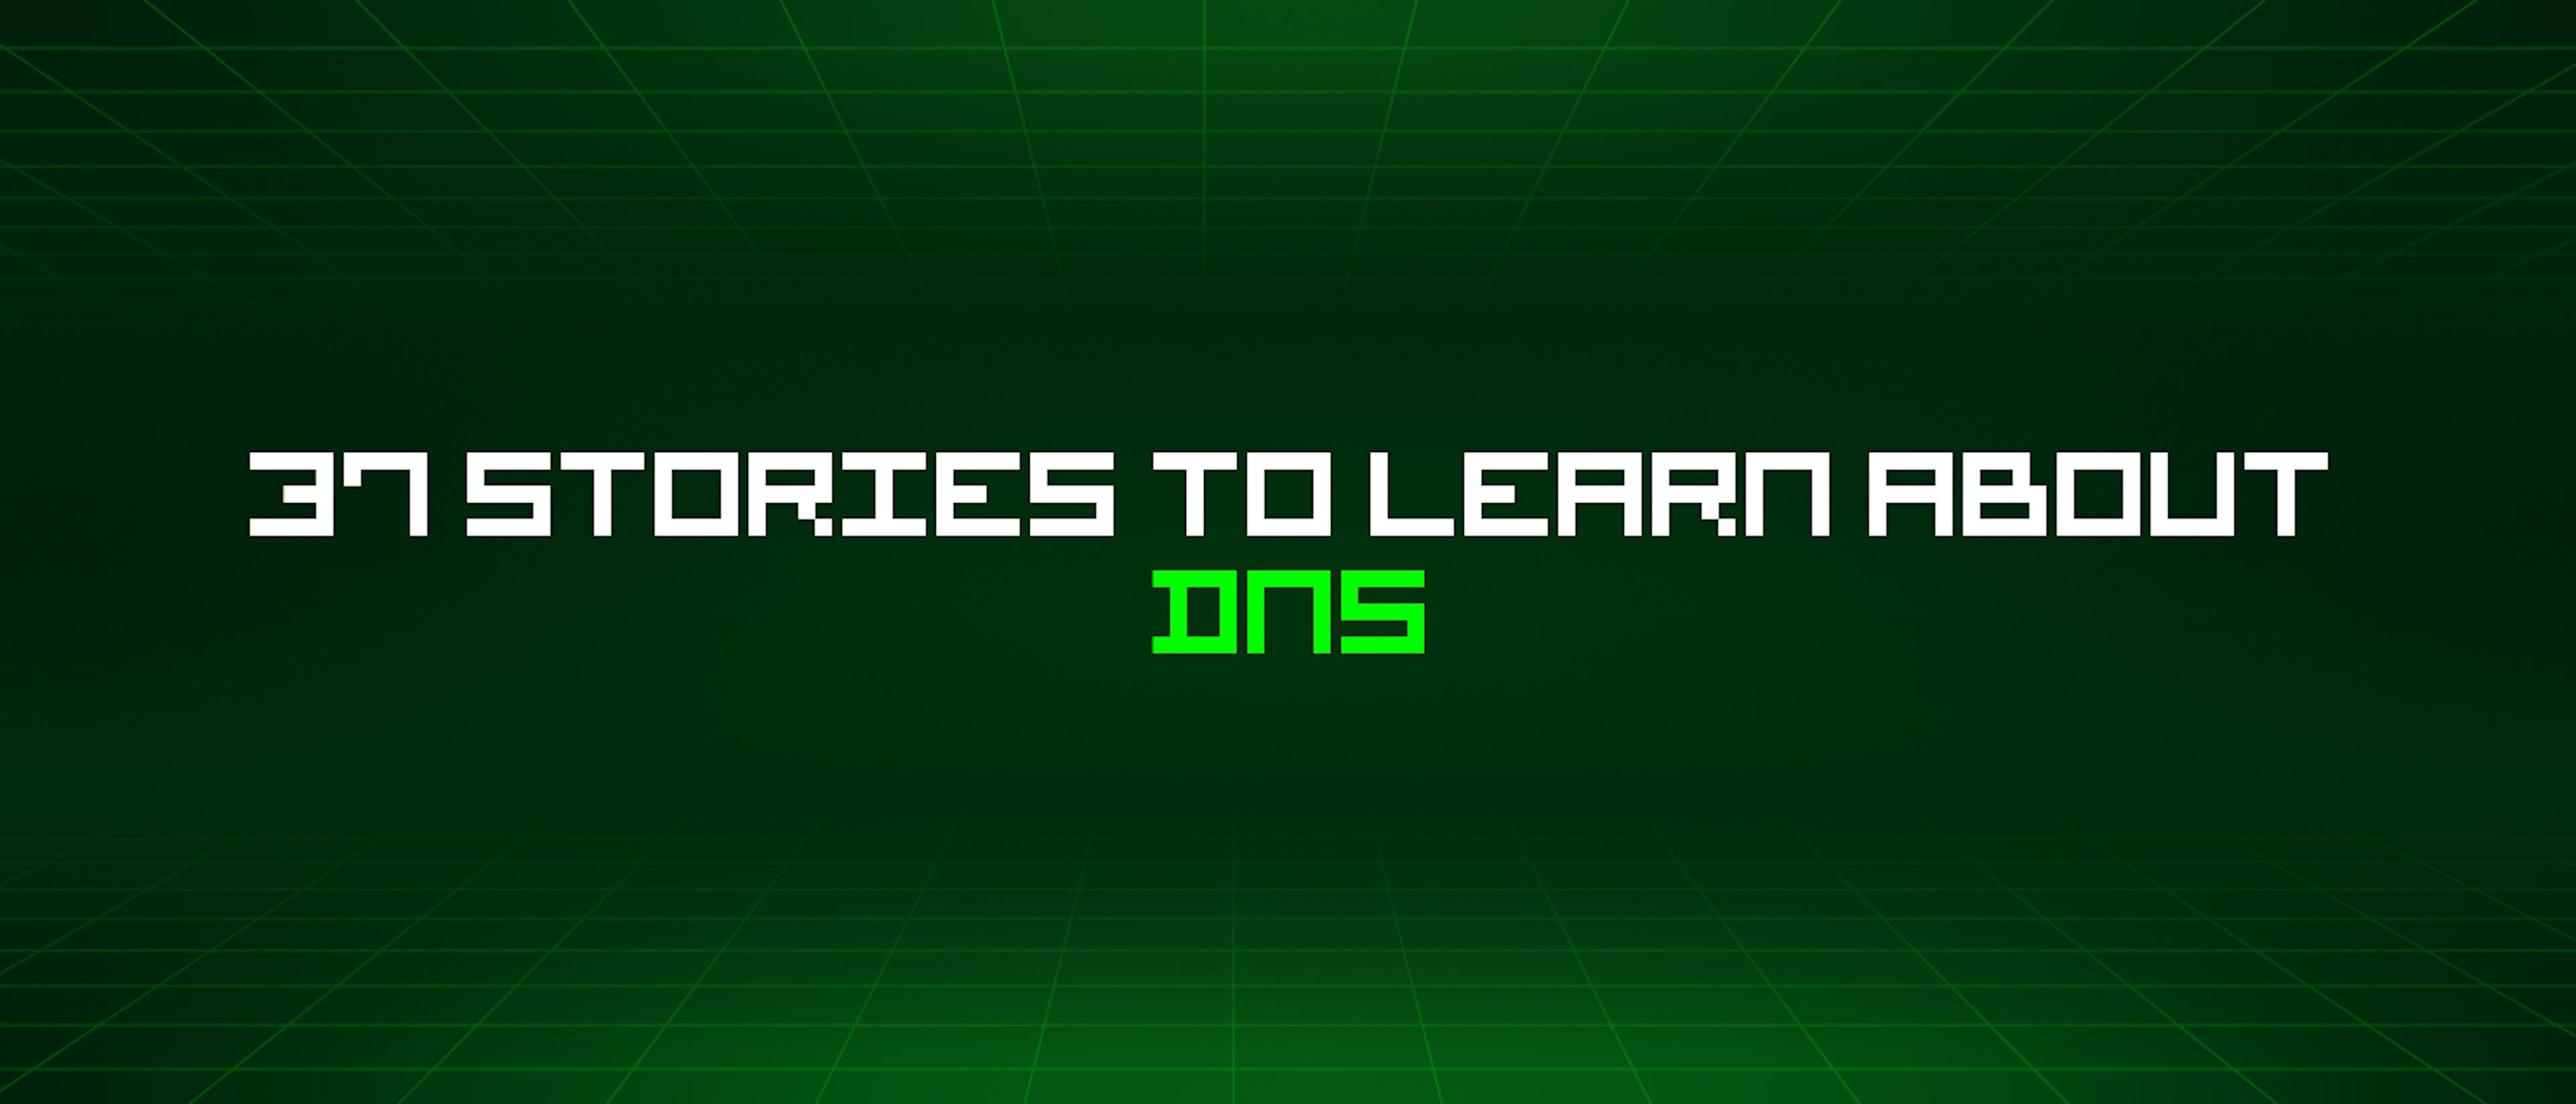 featured image - 37 Stories To Learn About Dns